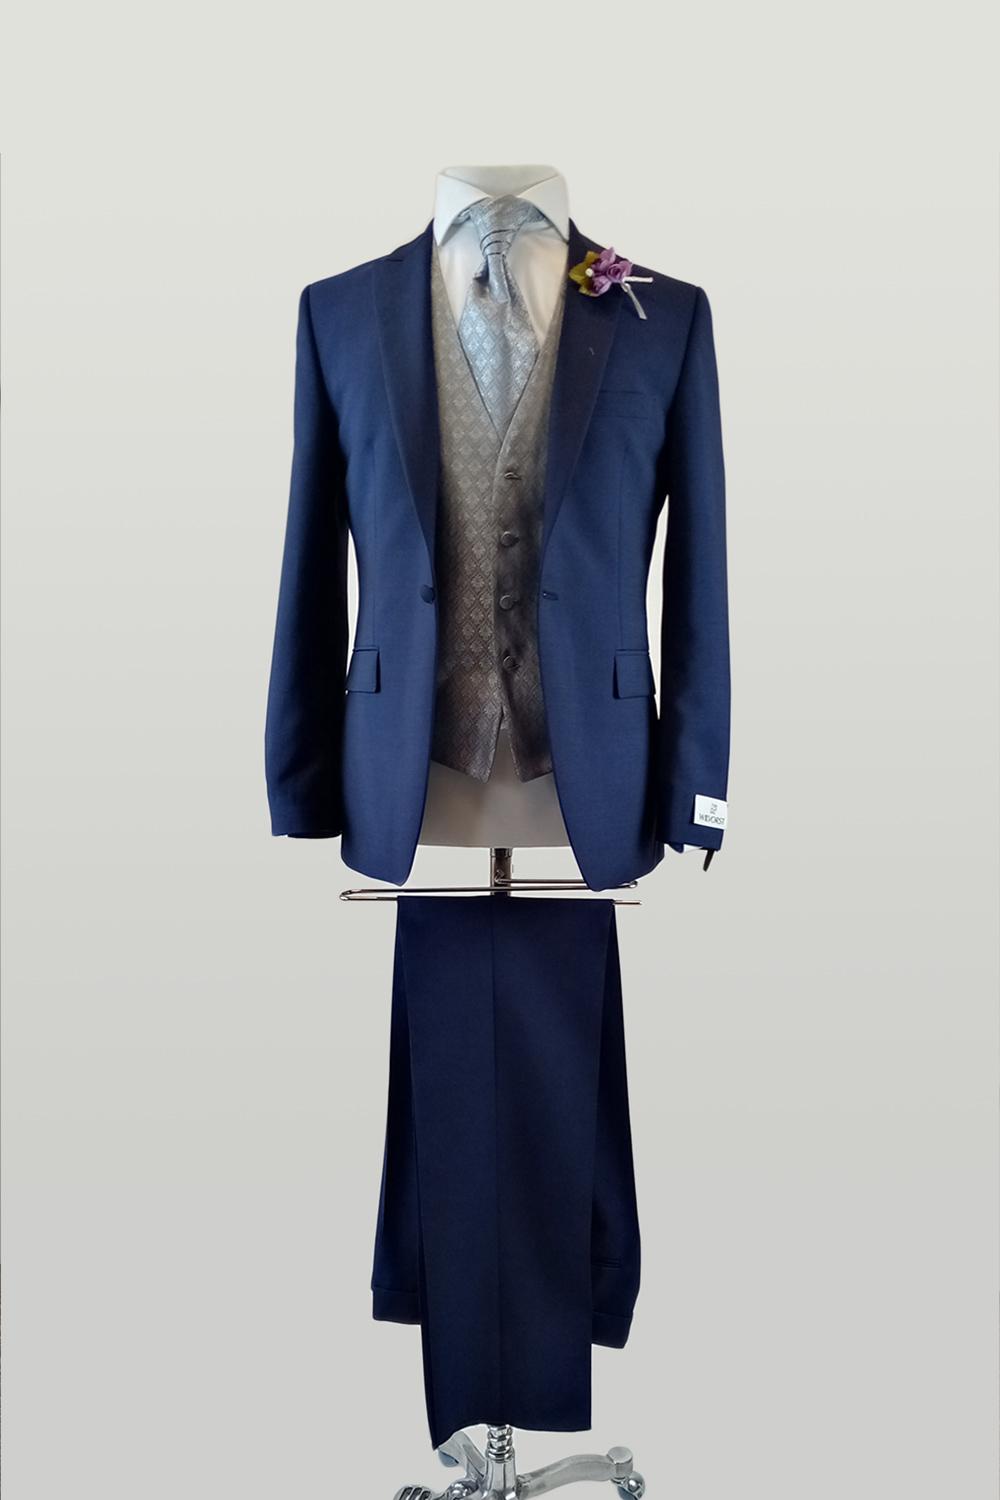 Royal 1 Button 3 Piece Suit - Tom Murphy's Formal and Menswear